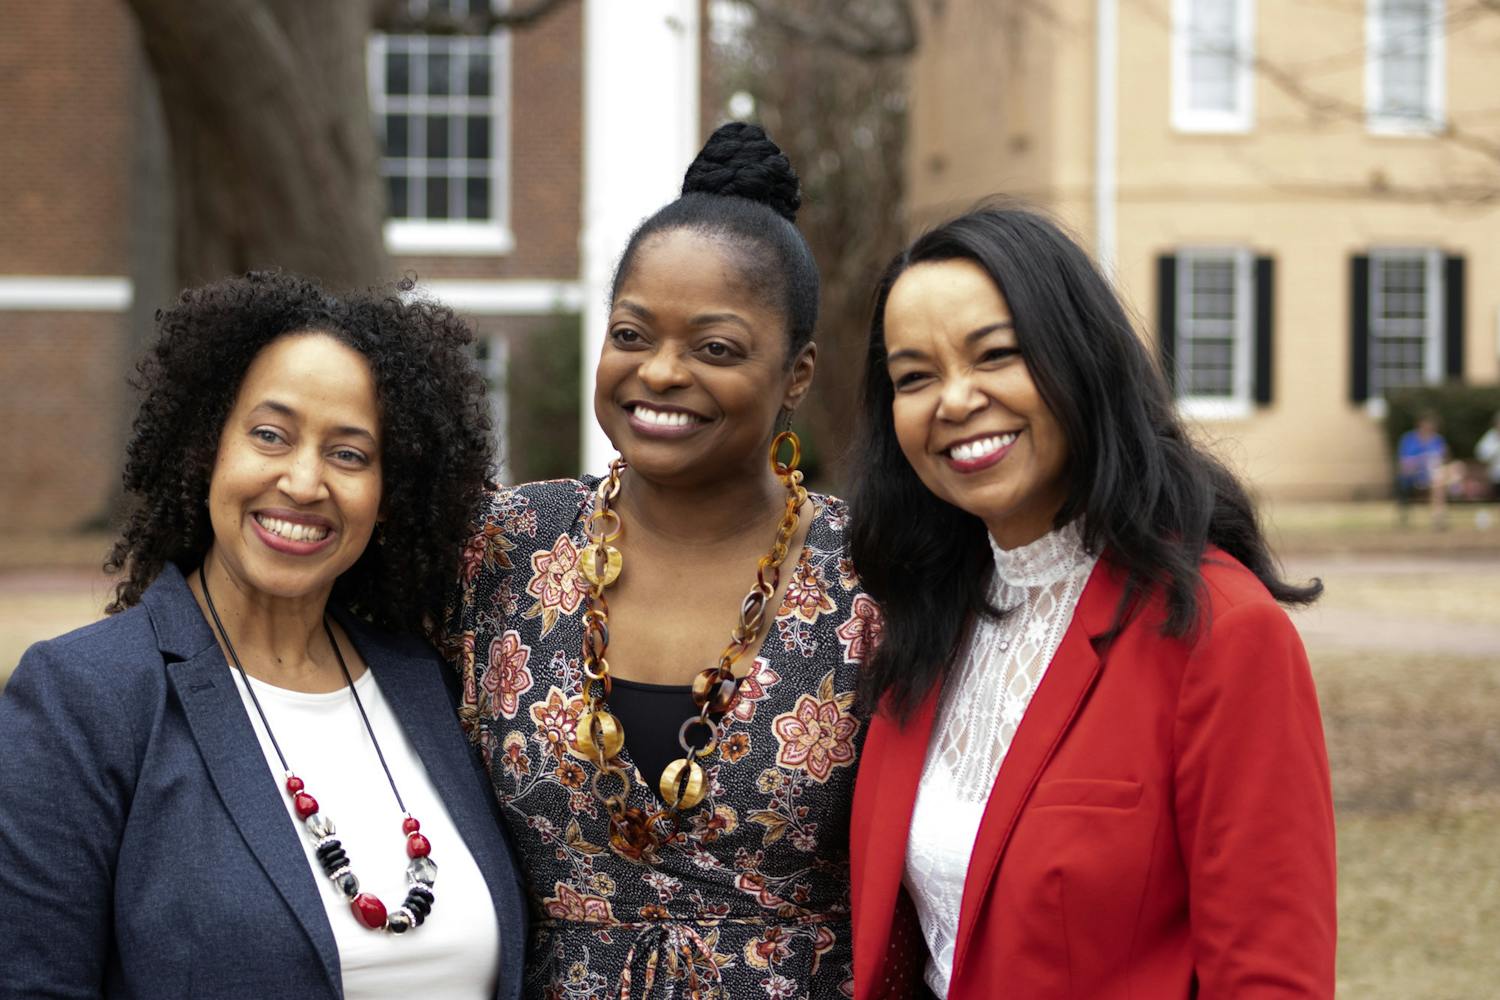 Three 鶹С򽴫ý alumnae and interviews in the student documentary, "The Backbone," pose for a photo at the Horseshoe on Feb. 10, 2023. The Office of Diversity, Equity and Inclusion revealed 18 new bricks in honor of them women that created the film.&nbsp;